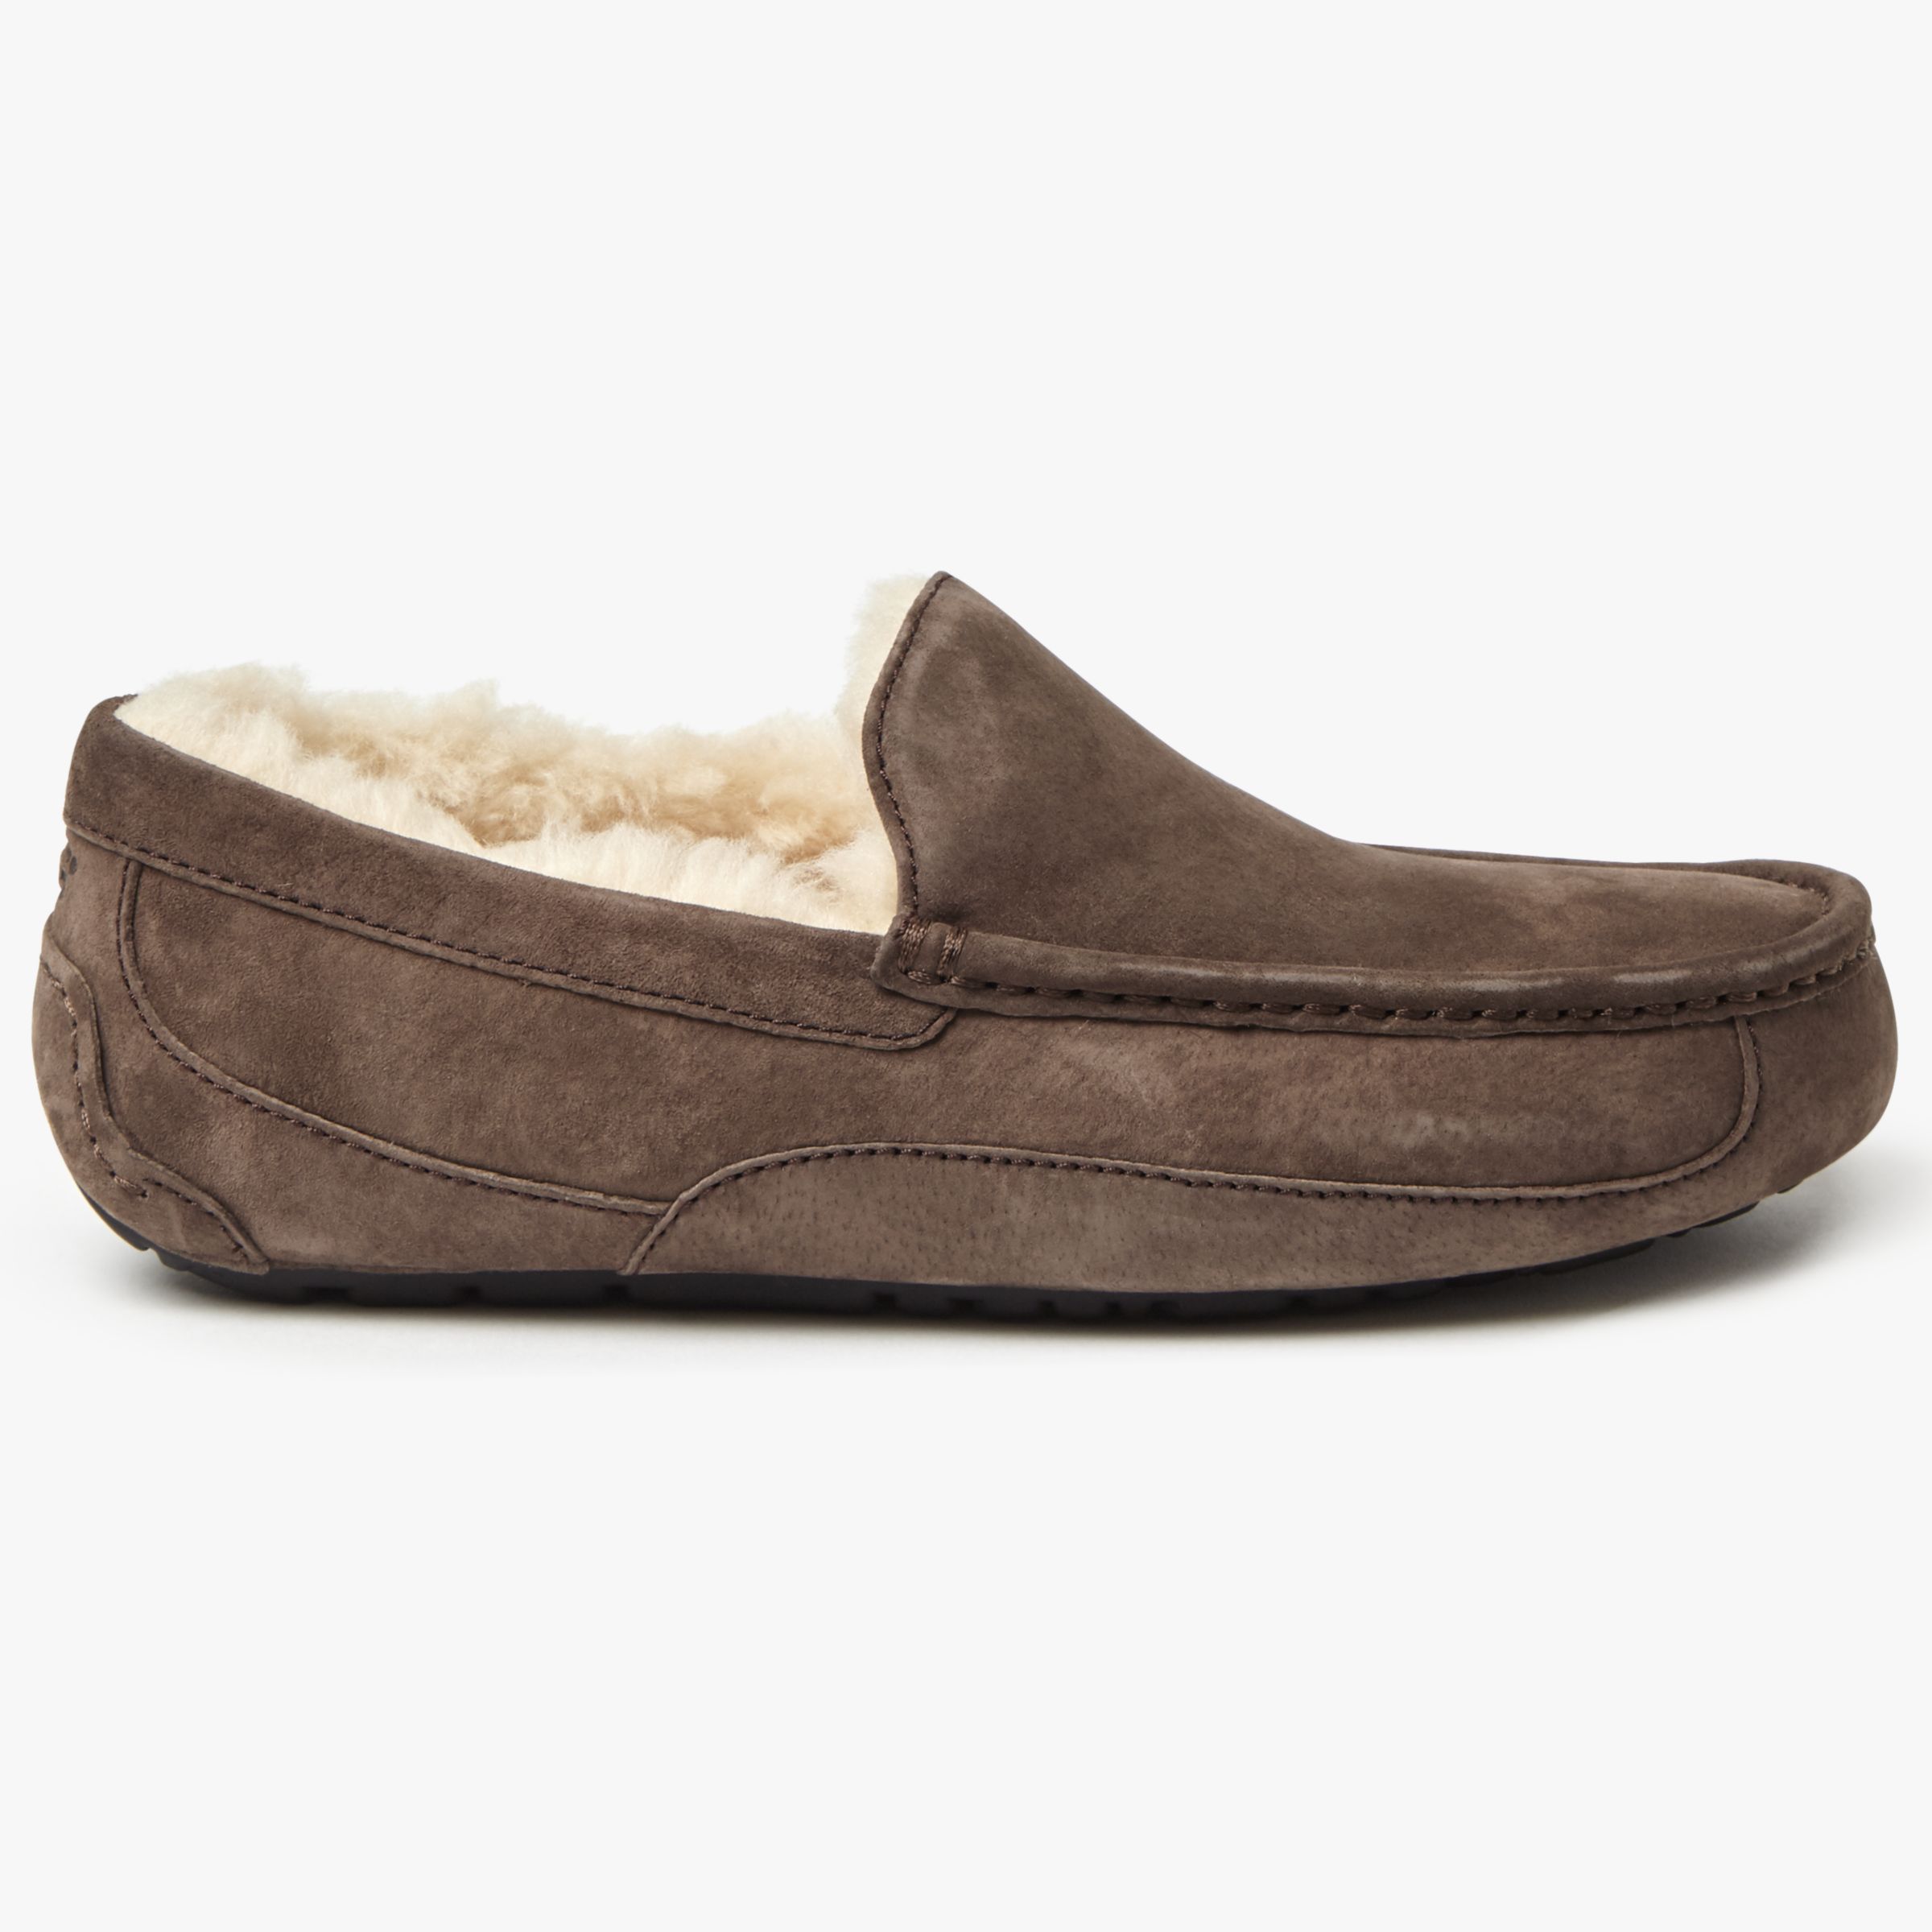 UGG Ascot Moccasin Suede Slippers 